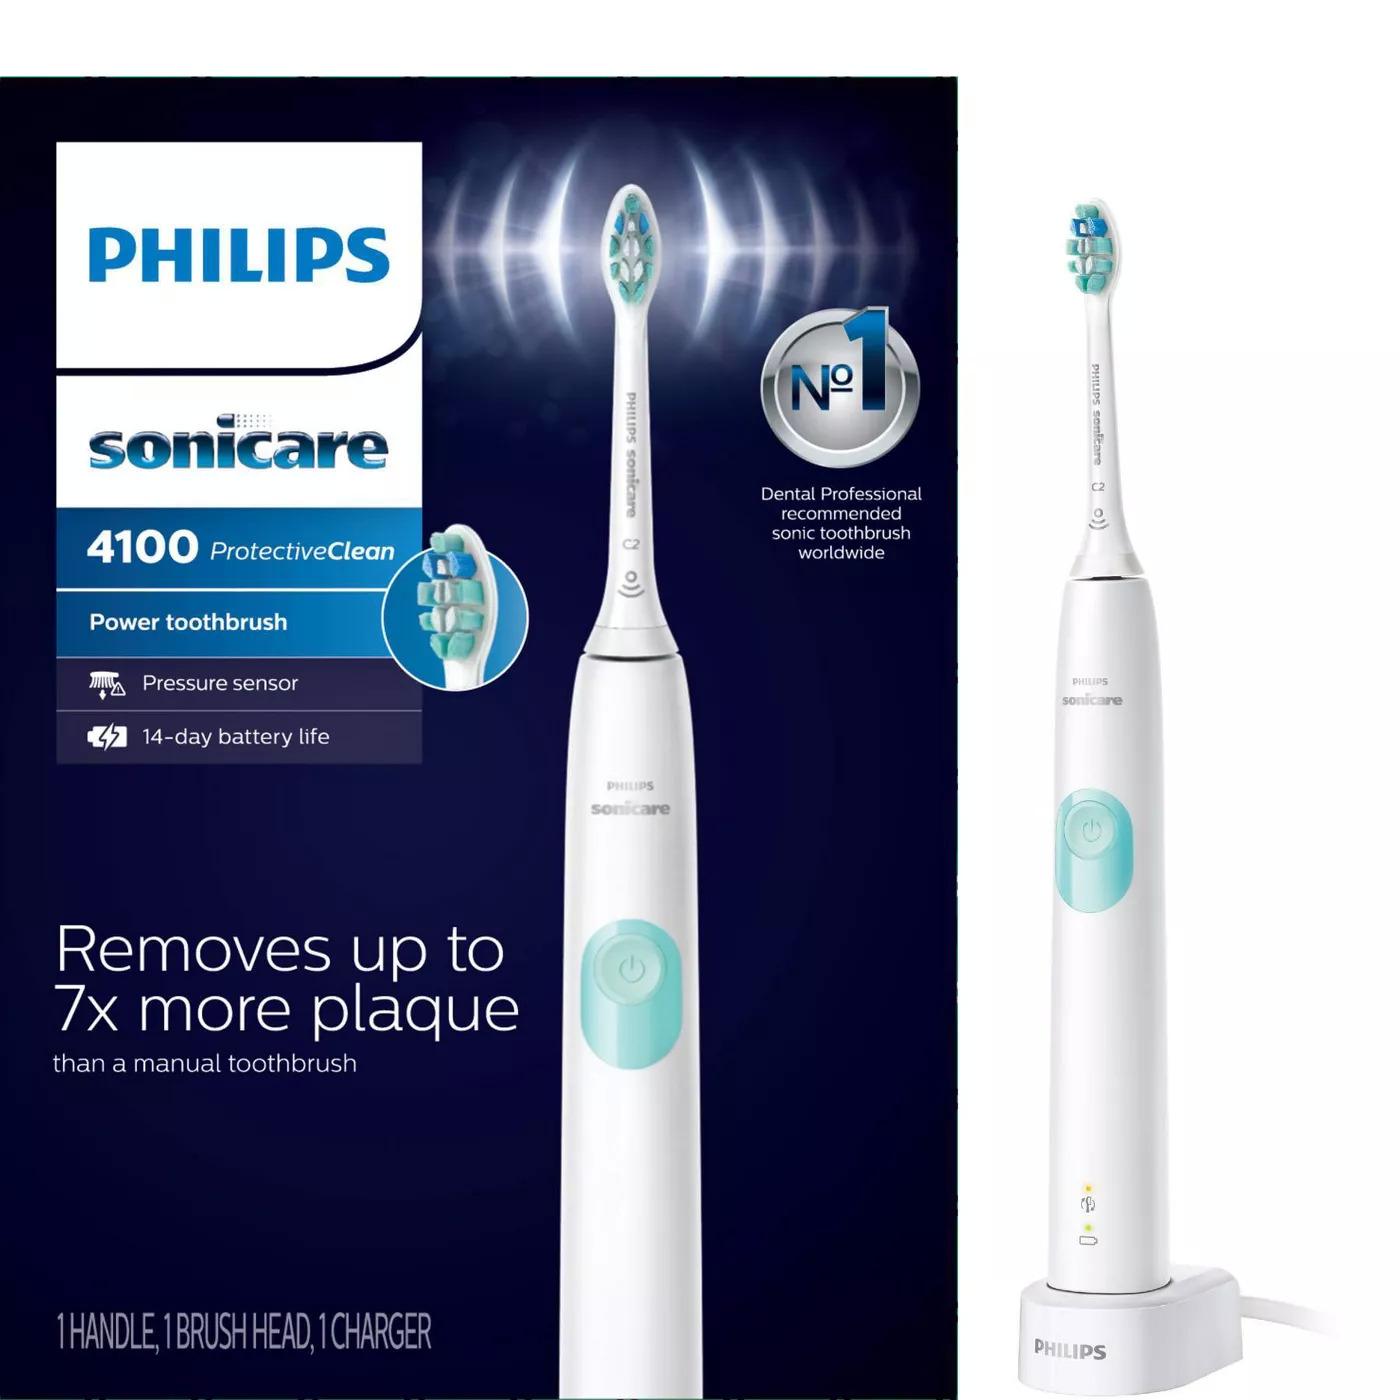 Philips Sonicare Protective Clean 4100 Electric Toothbrush for $29.99